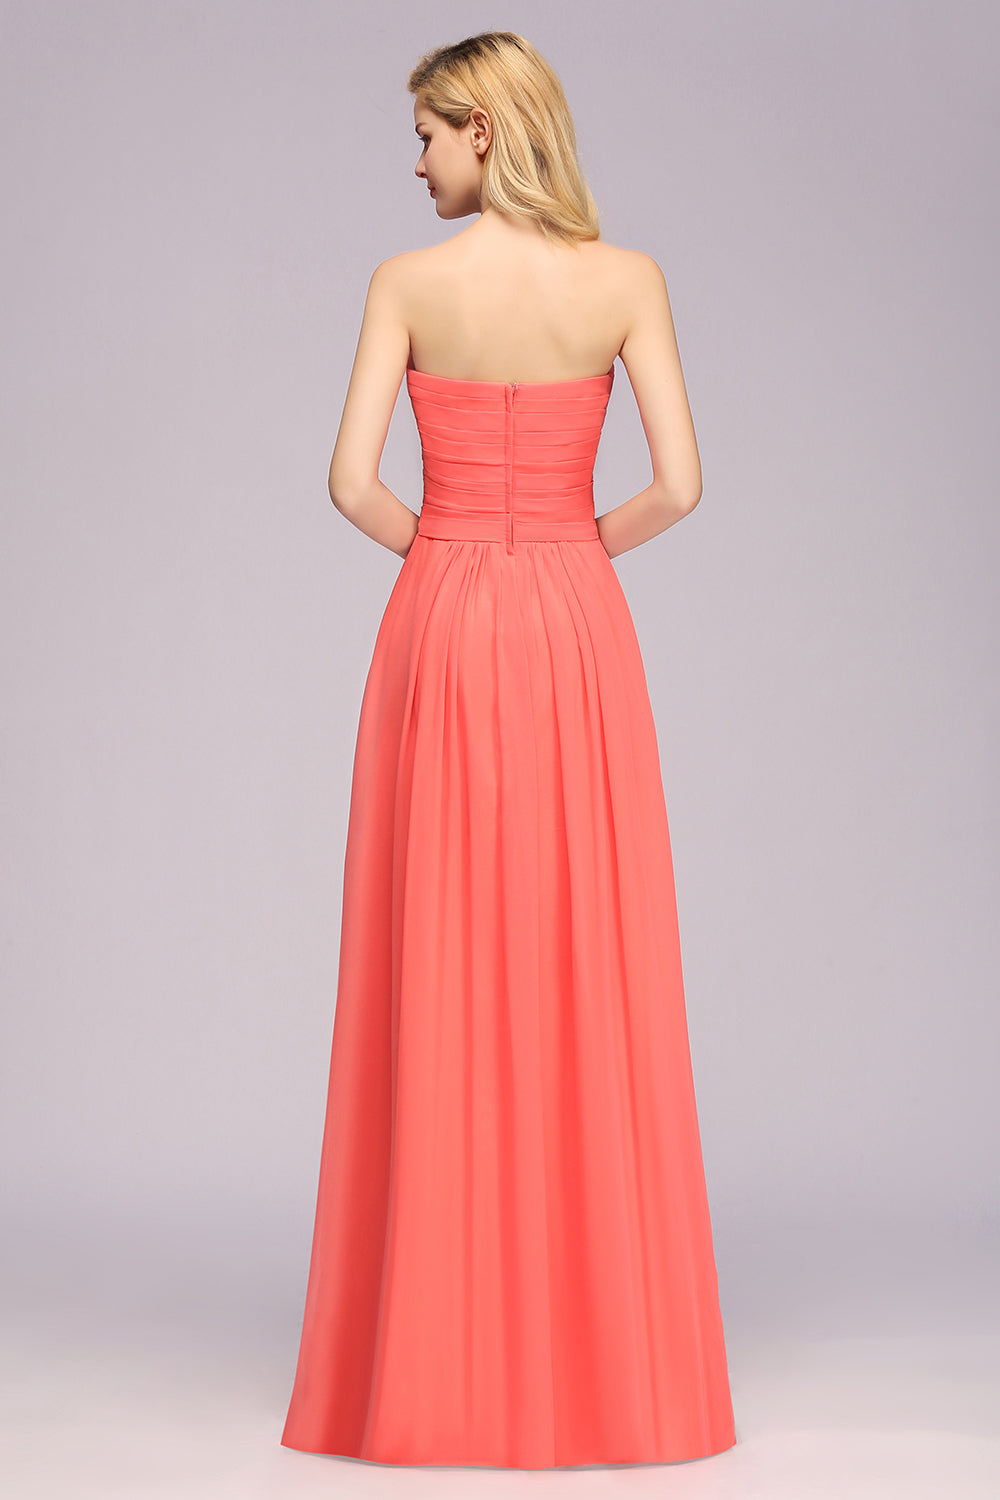 Simple Long Sweetheart Strapless A-line Bridesmaid Dress with Flower-BIZTUNNEL